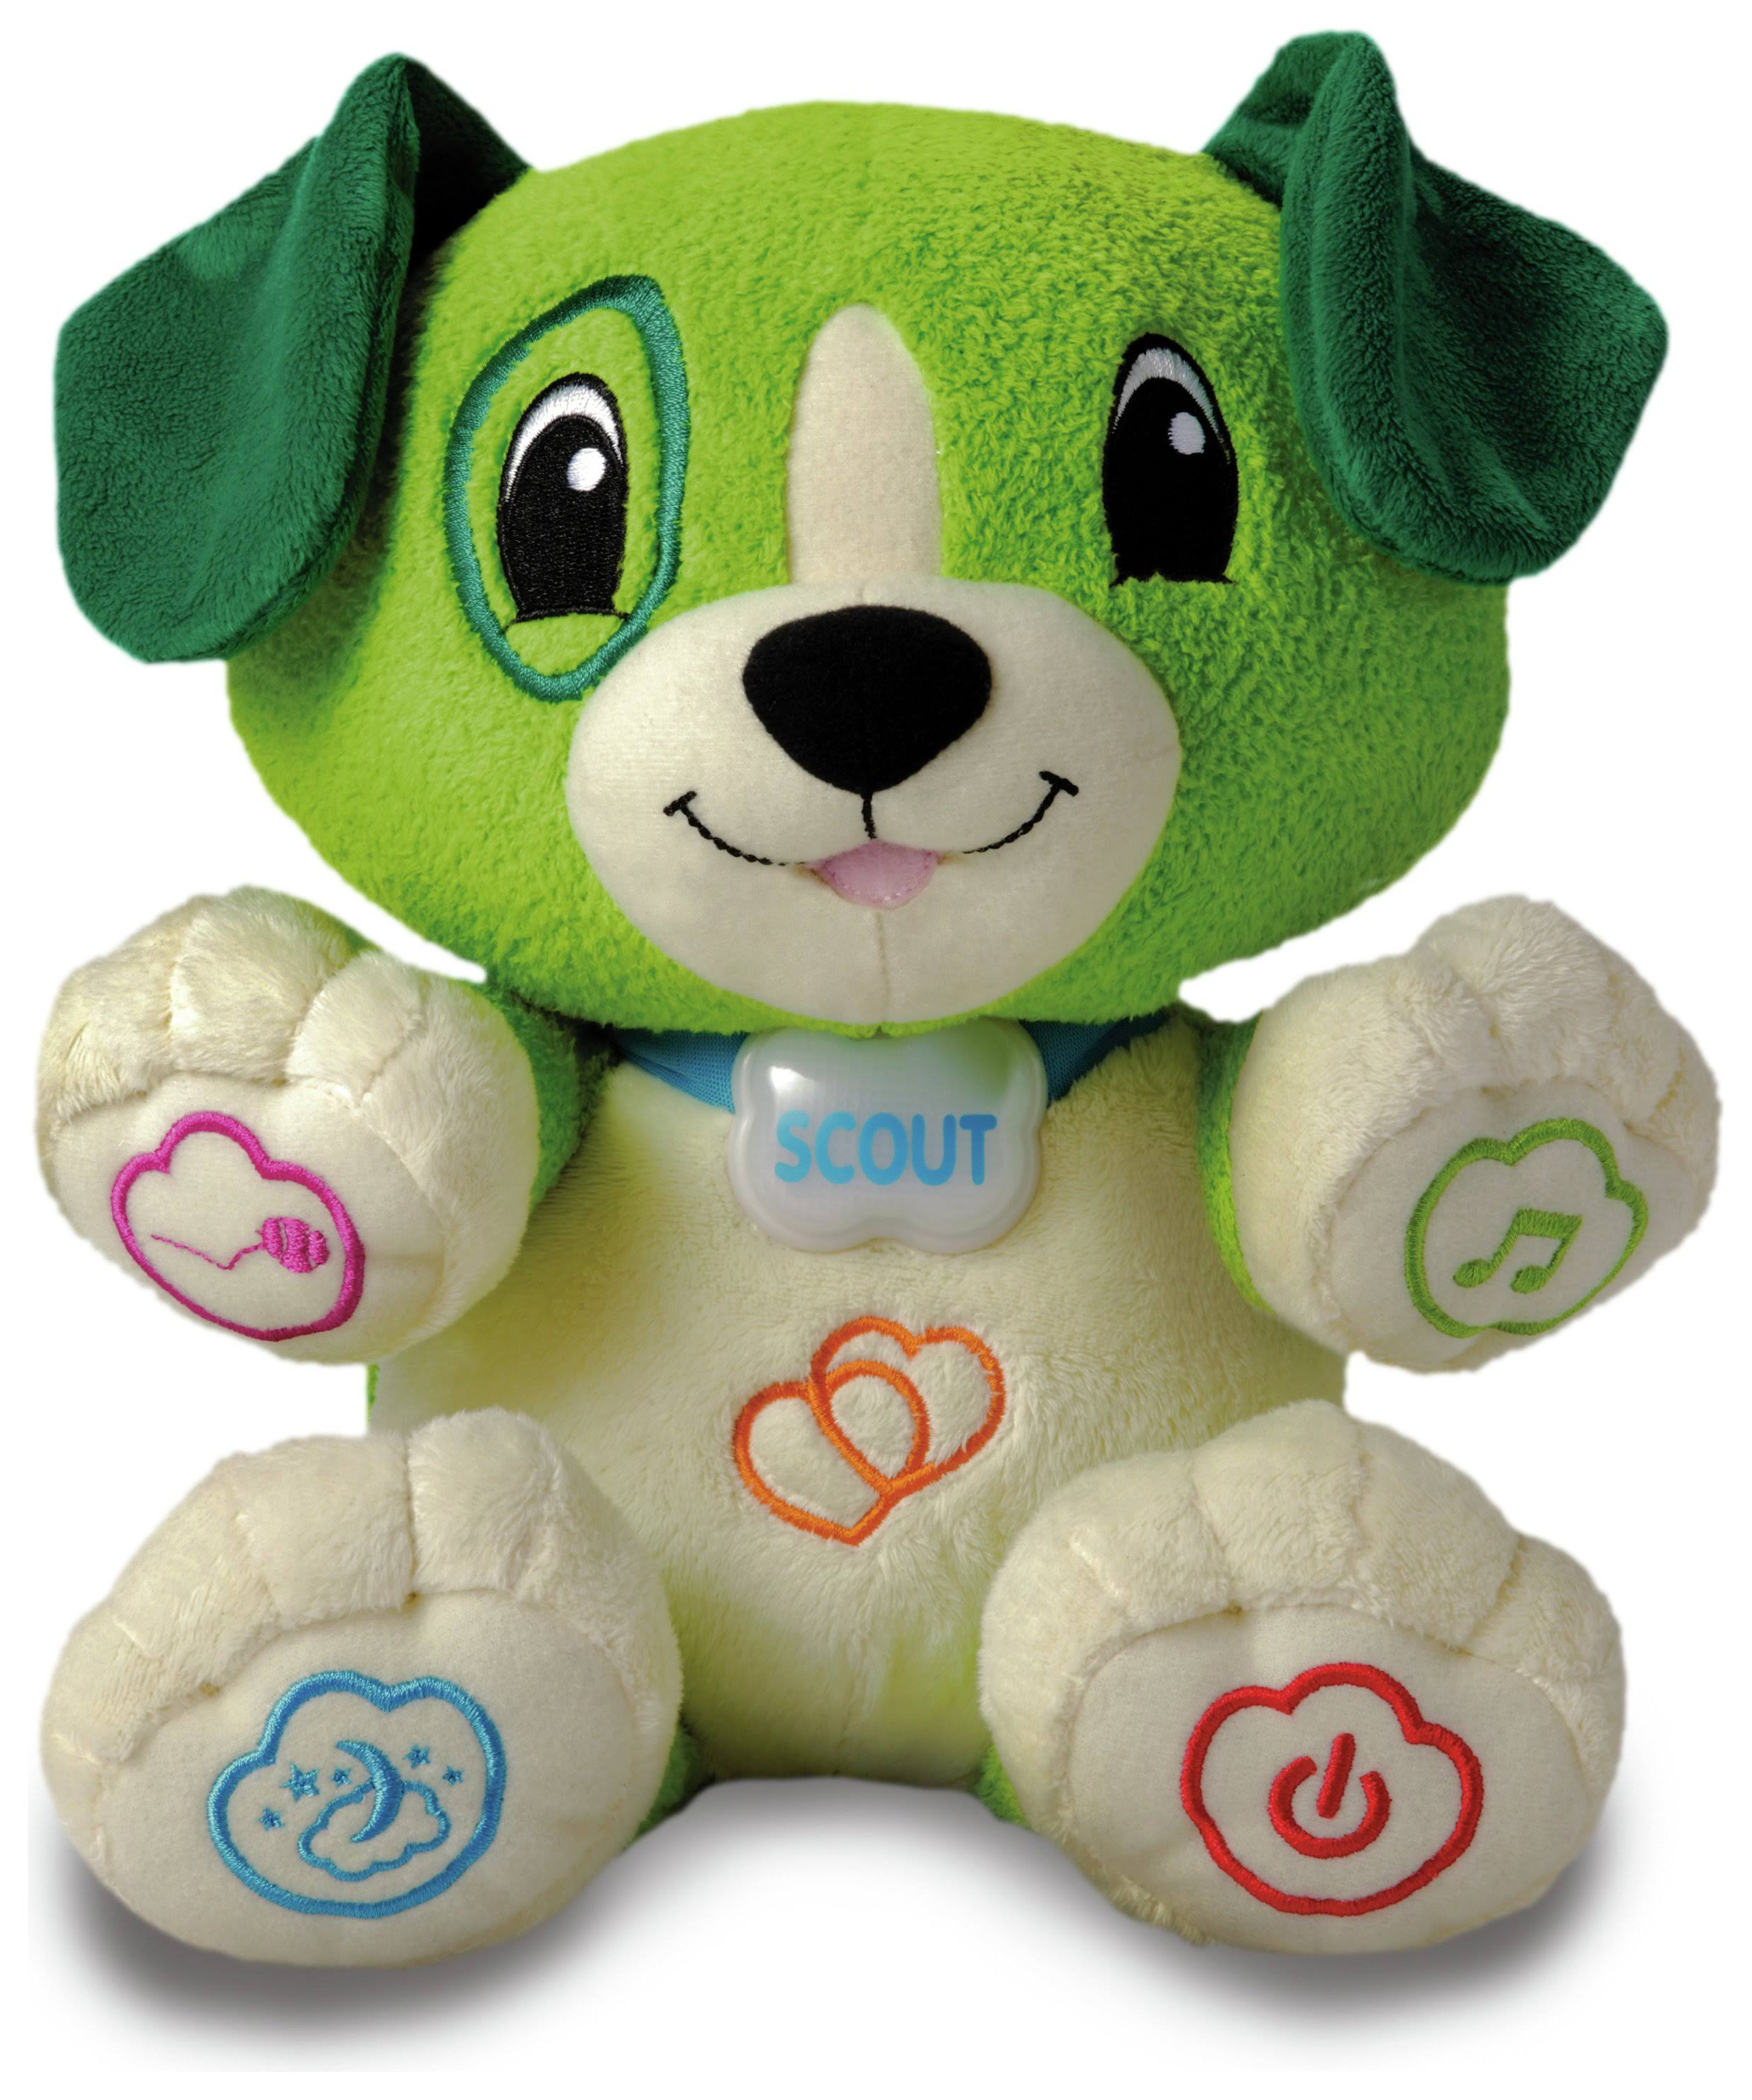 LeapFrog My Pal Scout Puppy Learning Toy - Green